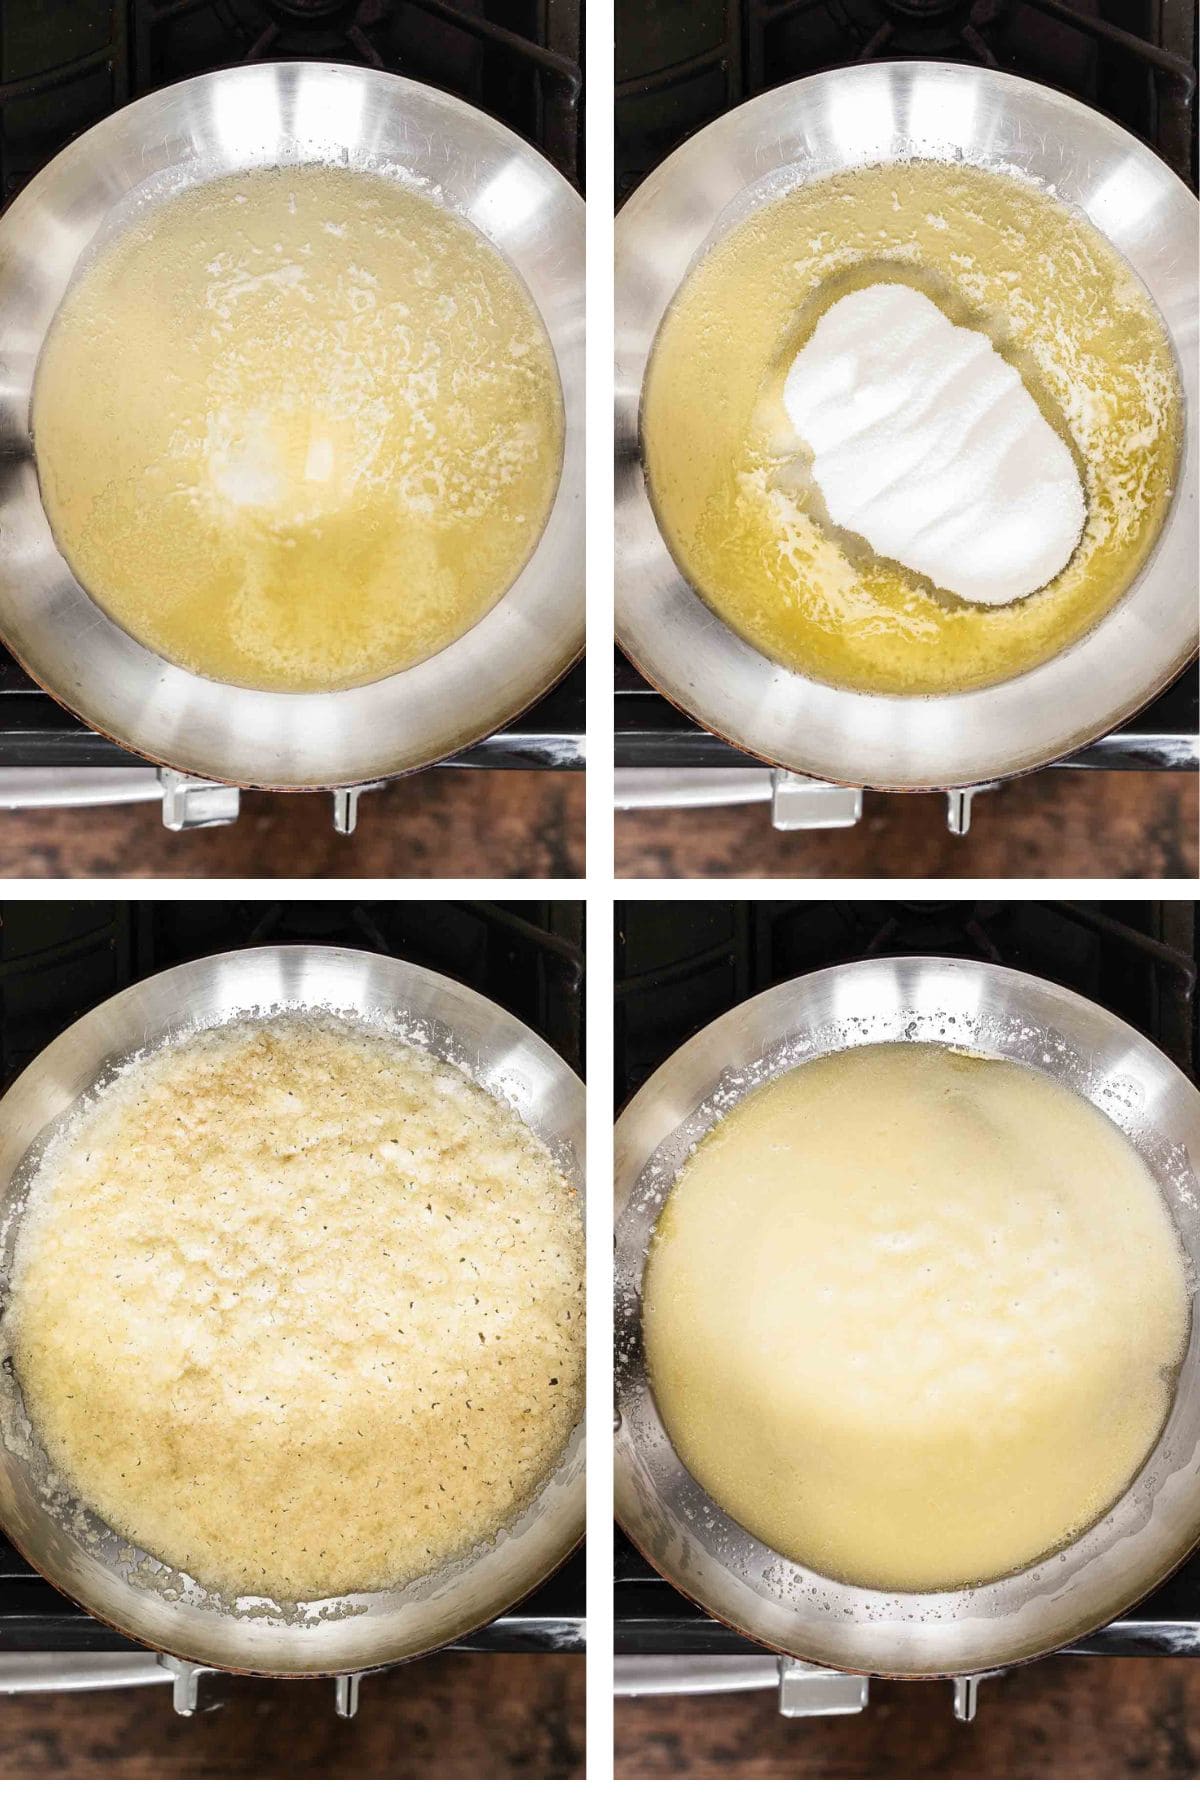 Four images showing the first steps of preparing salted caramel sauce, including melting butter, adding granulated sugar, and letting sugar melt.